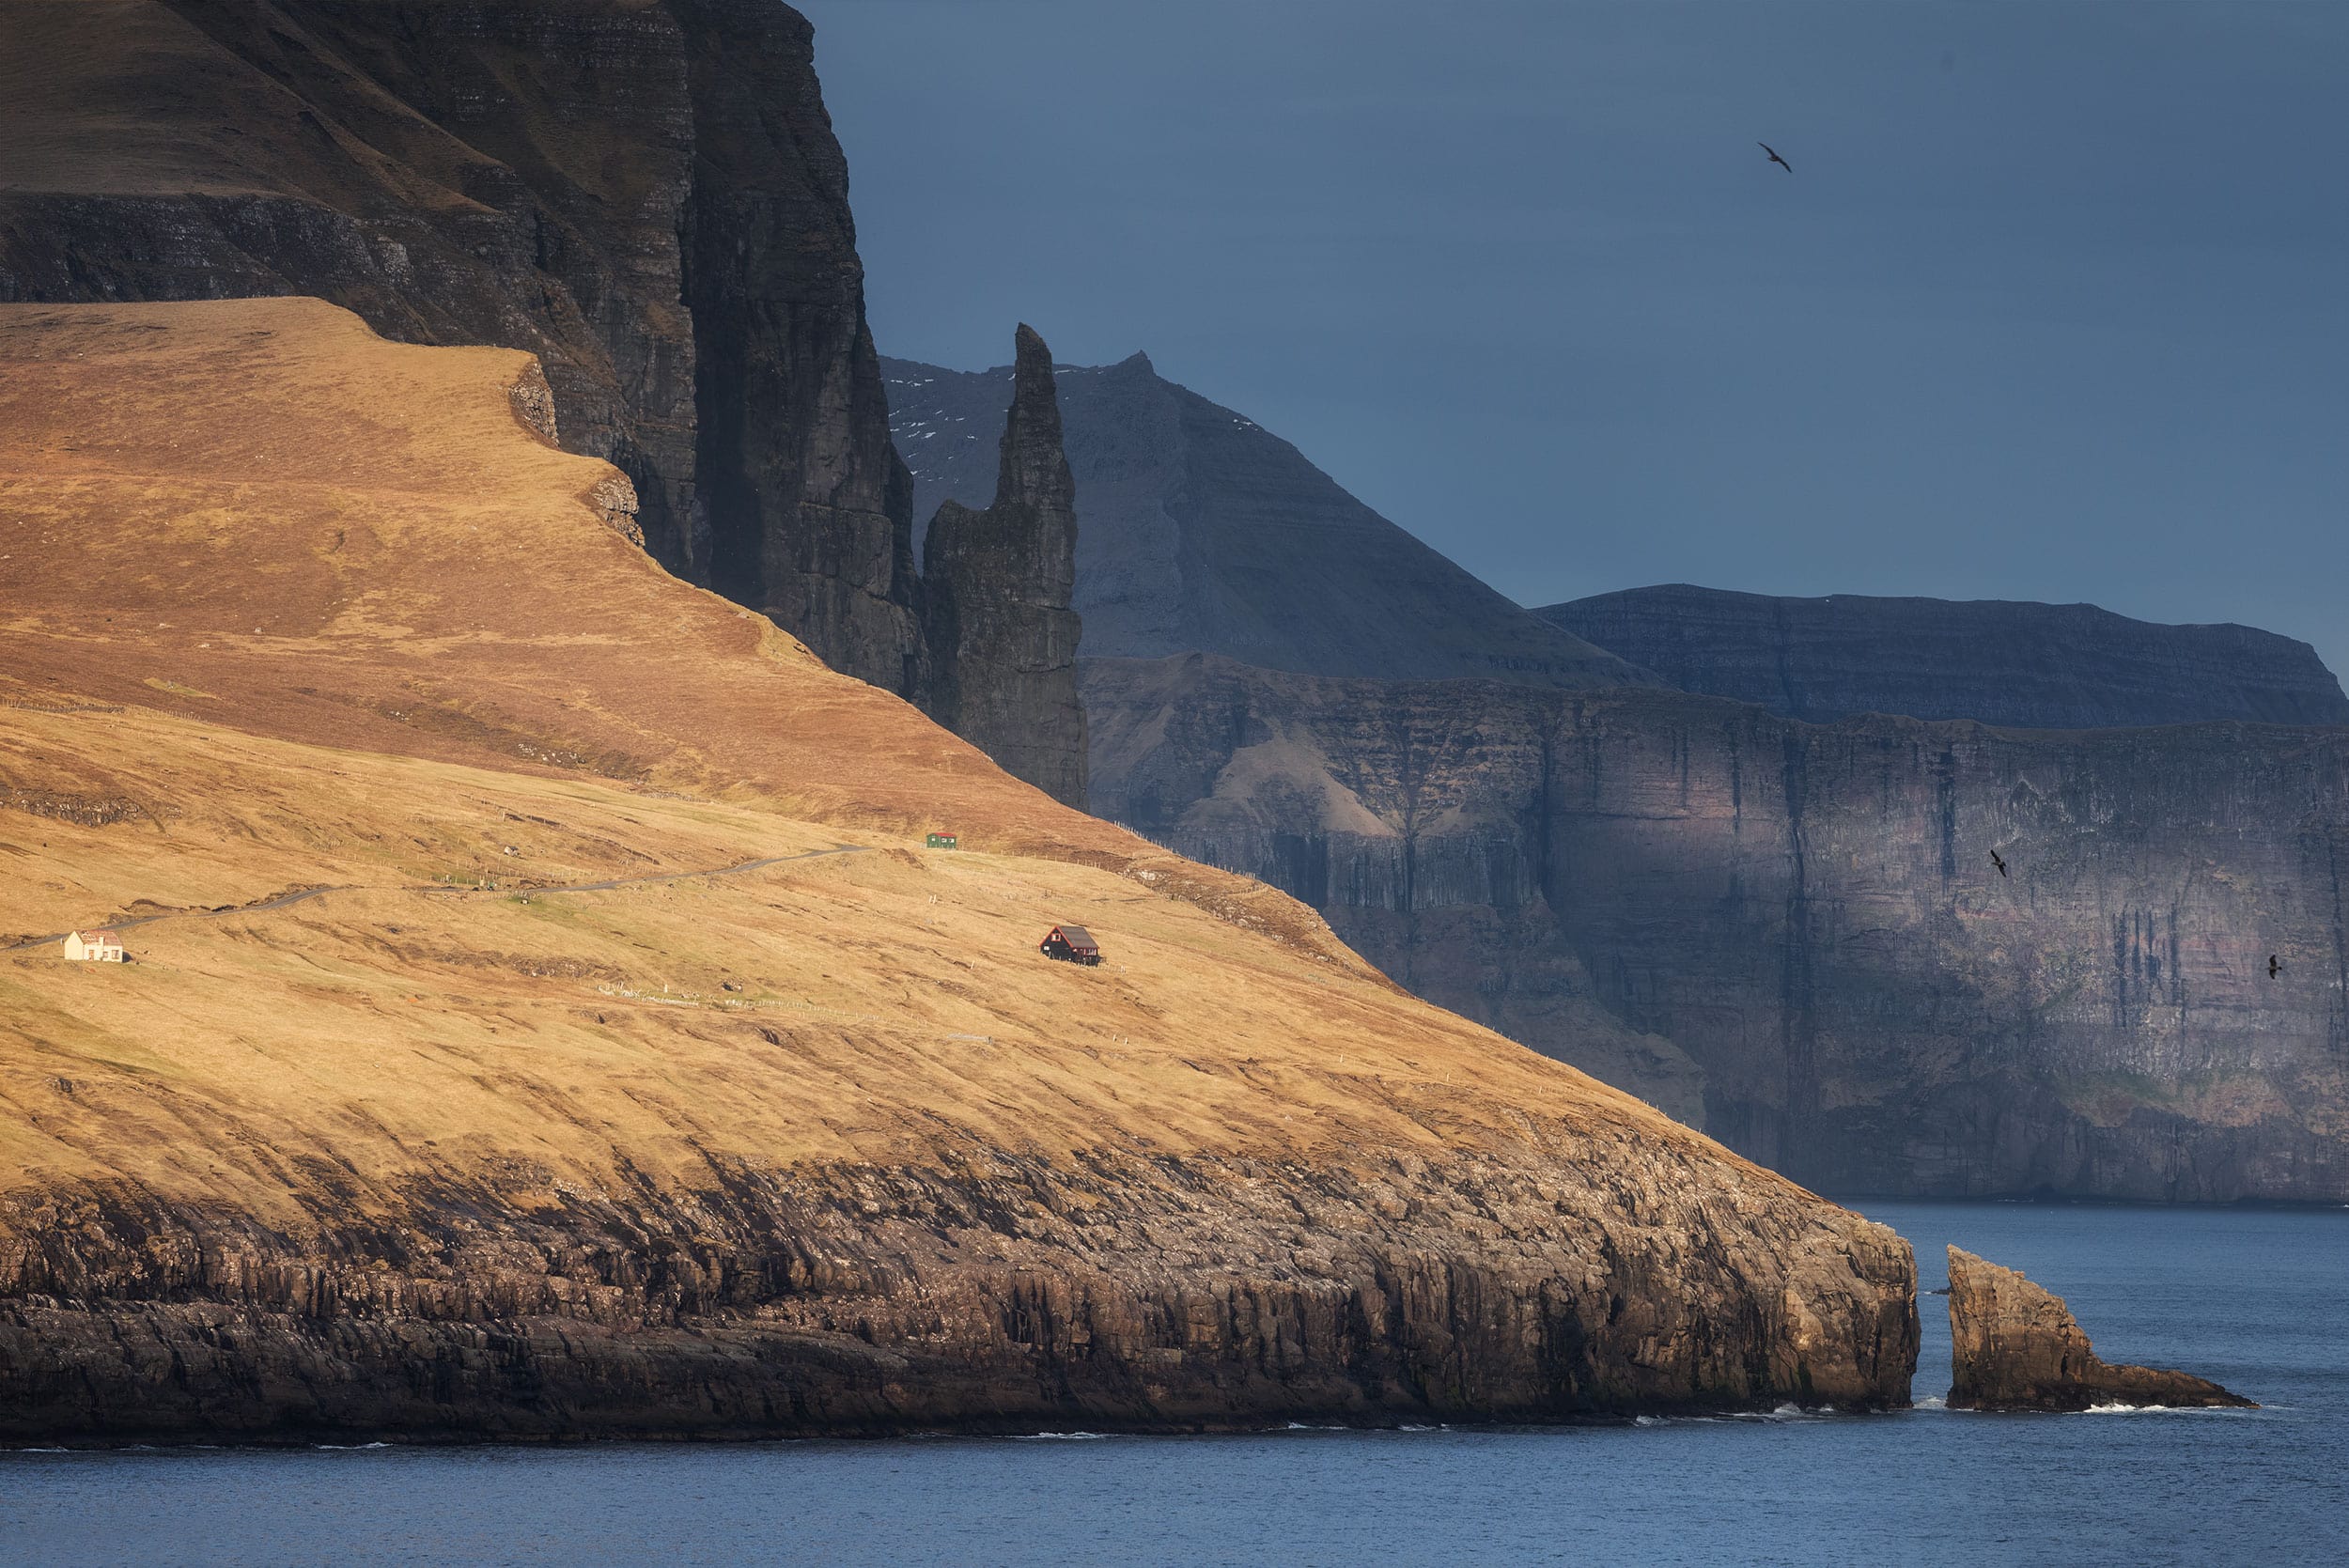 Delve into the breathtaking landscapes of the Faroe Islands with this captivating landscape photograph showcasing the iconic Trøllkonufingur rock formation. As a renowned landmark of the Faroe Islands, Trøllkonufingur mesmerizes with its rugged beauty and mythical allure. Experience the raw majesty of this legendary rock through the lens of our landscape photography collection.